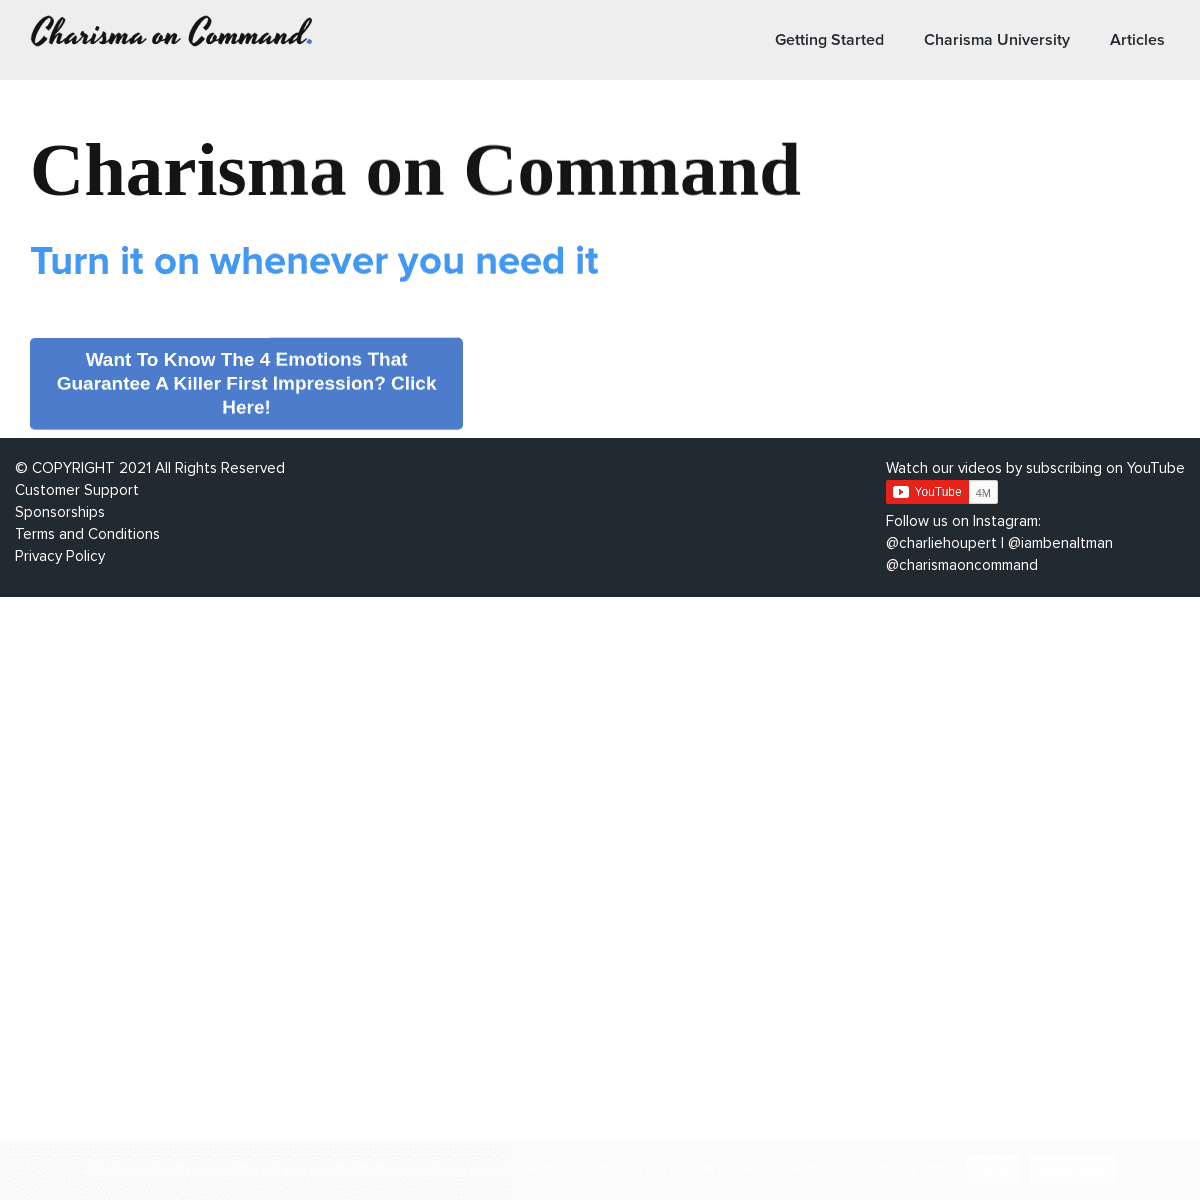 A complete backup of https://charismaoncommand.com